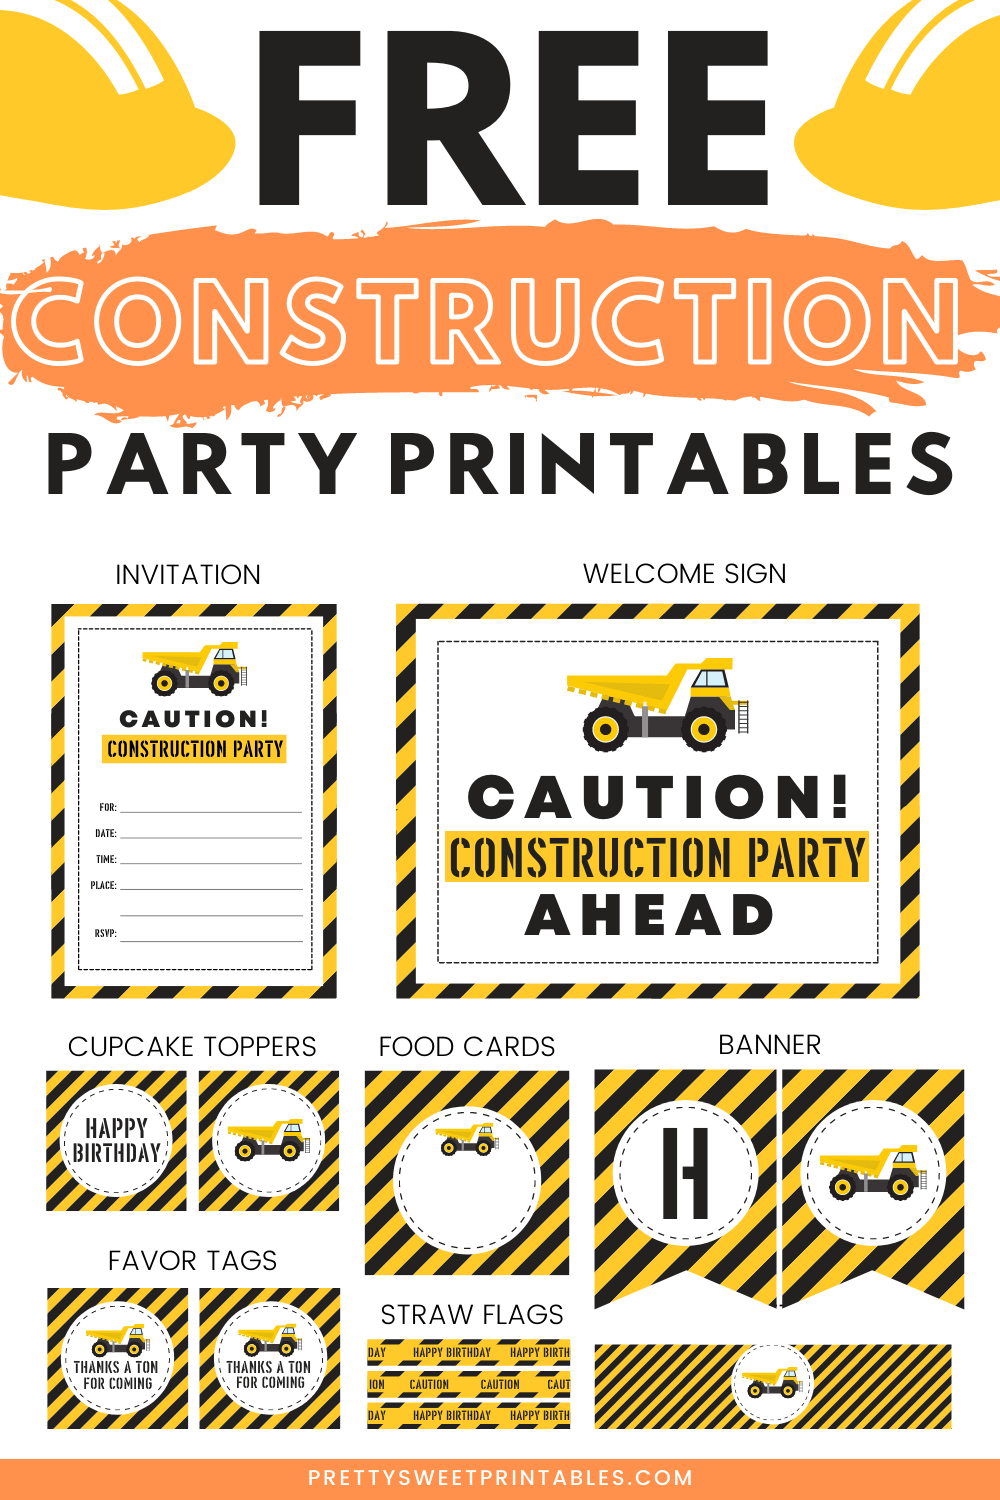 free-construction-party-printables-pretty-sweet